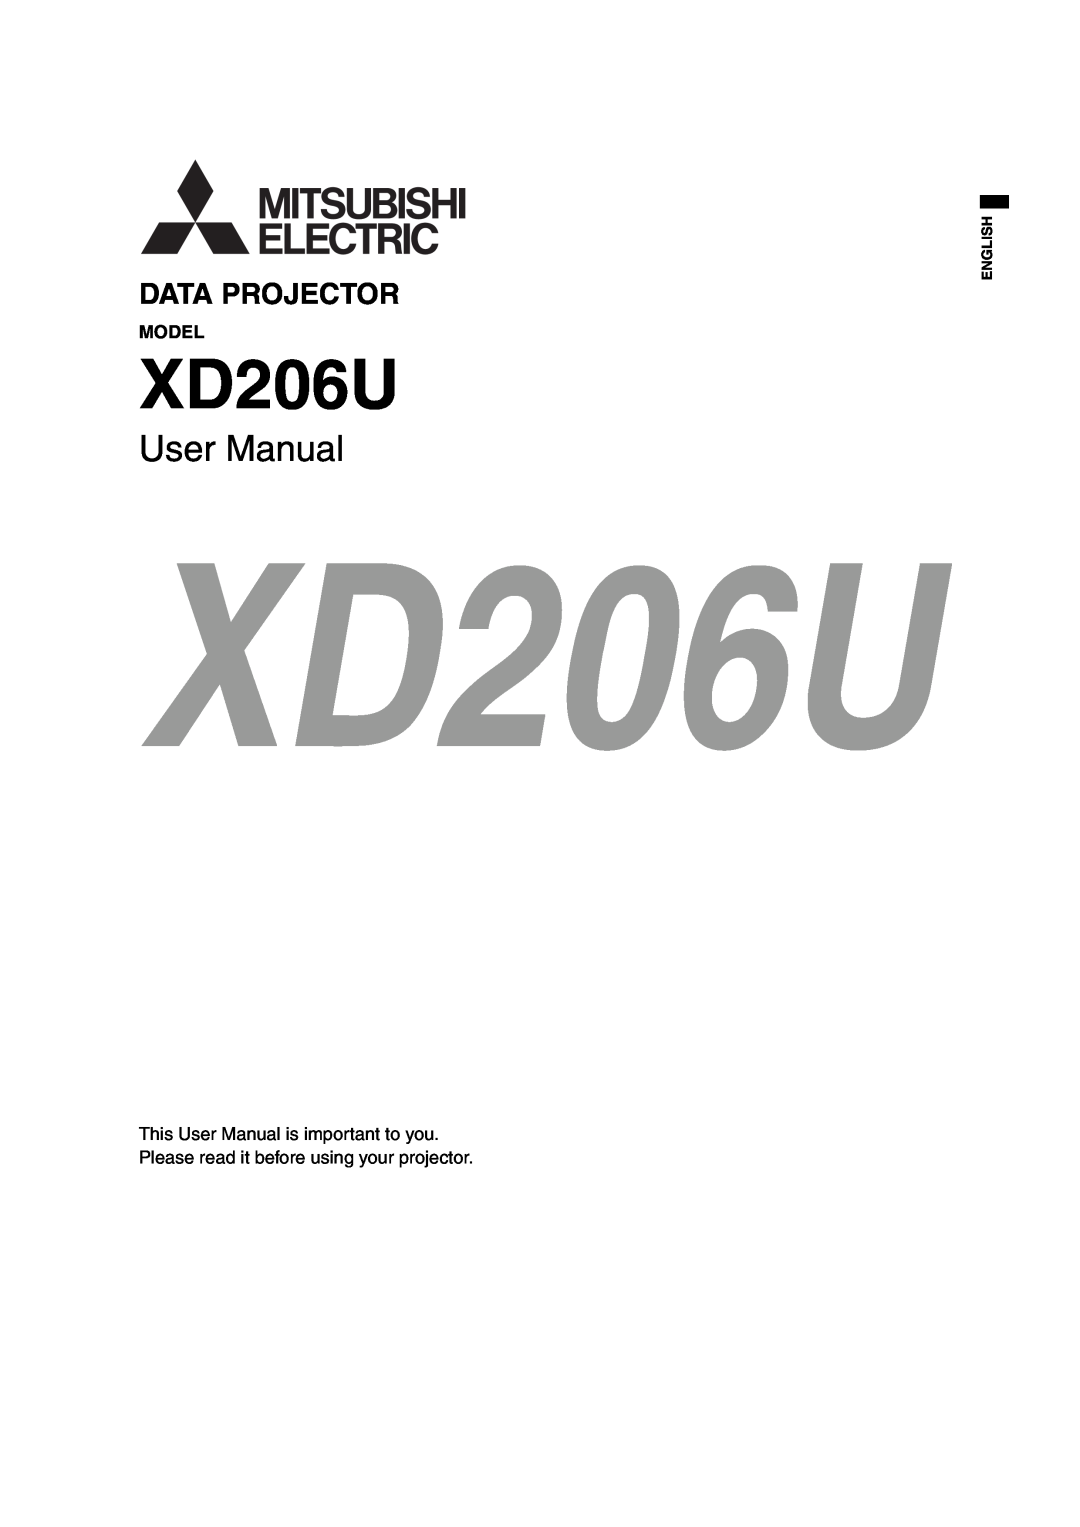 Mitsumi electronic XD206U user manual Model, This User Manual is important to you, English, Data Projector 